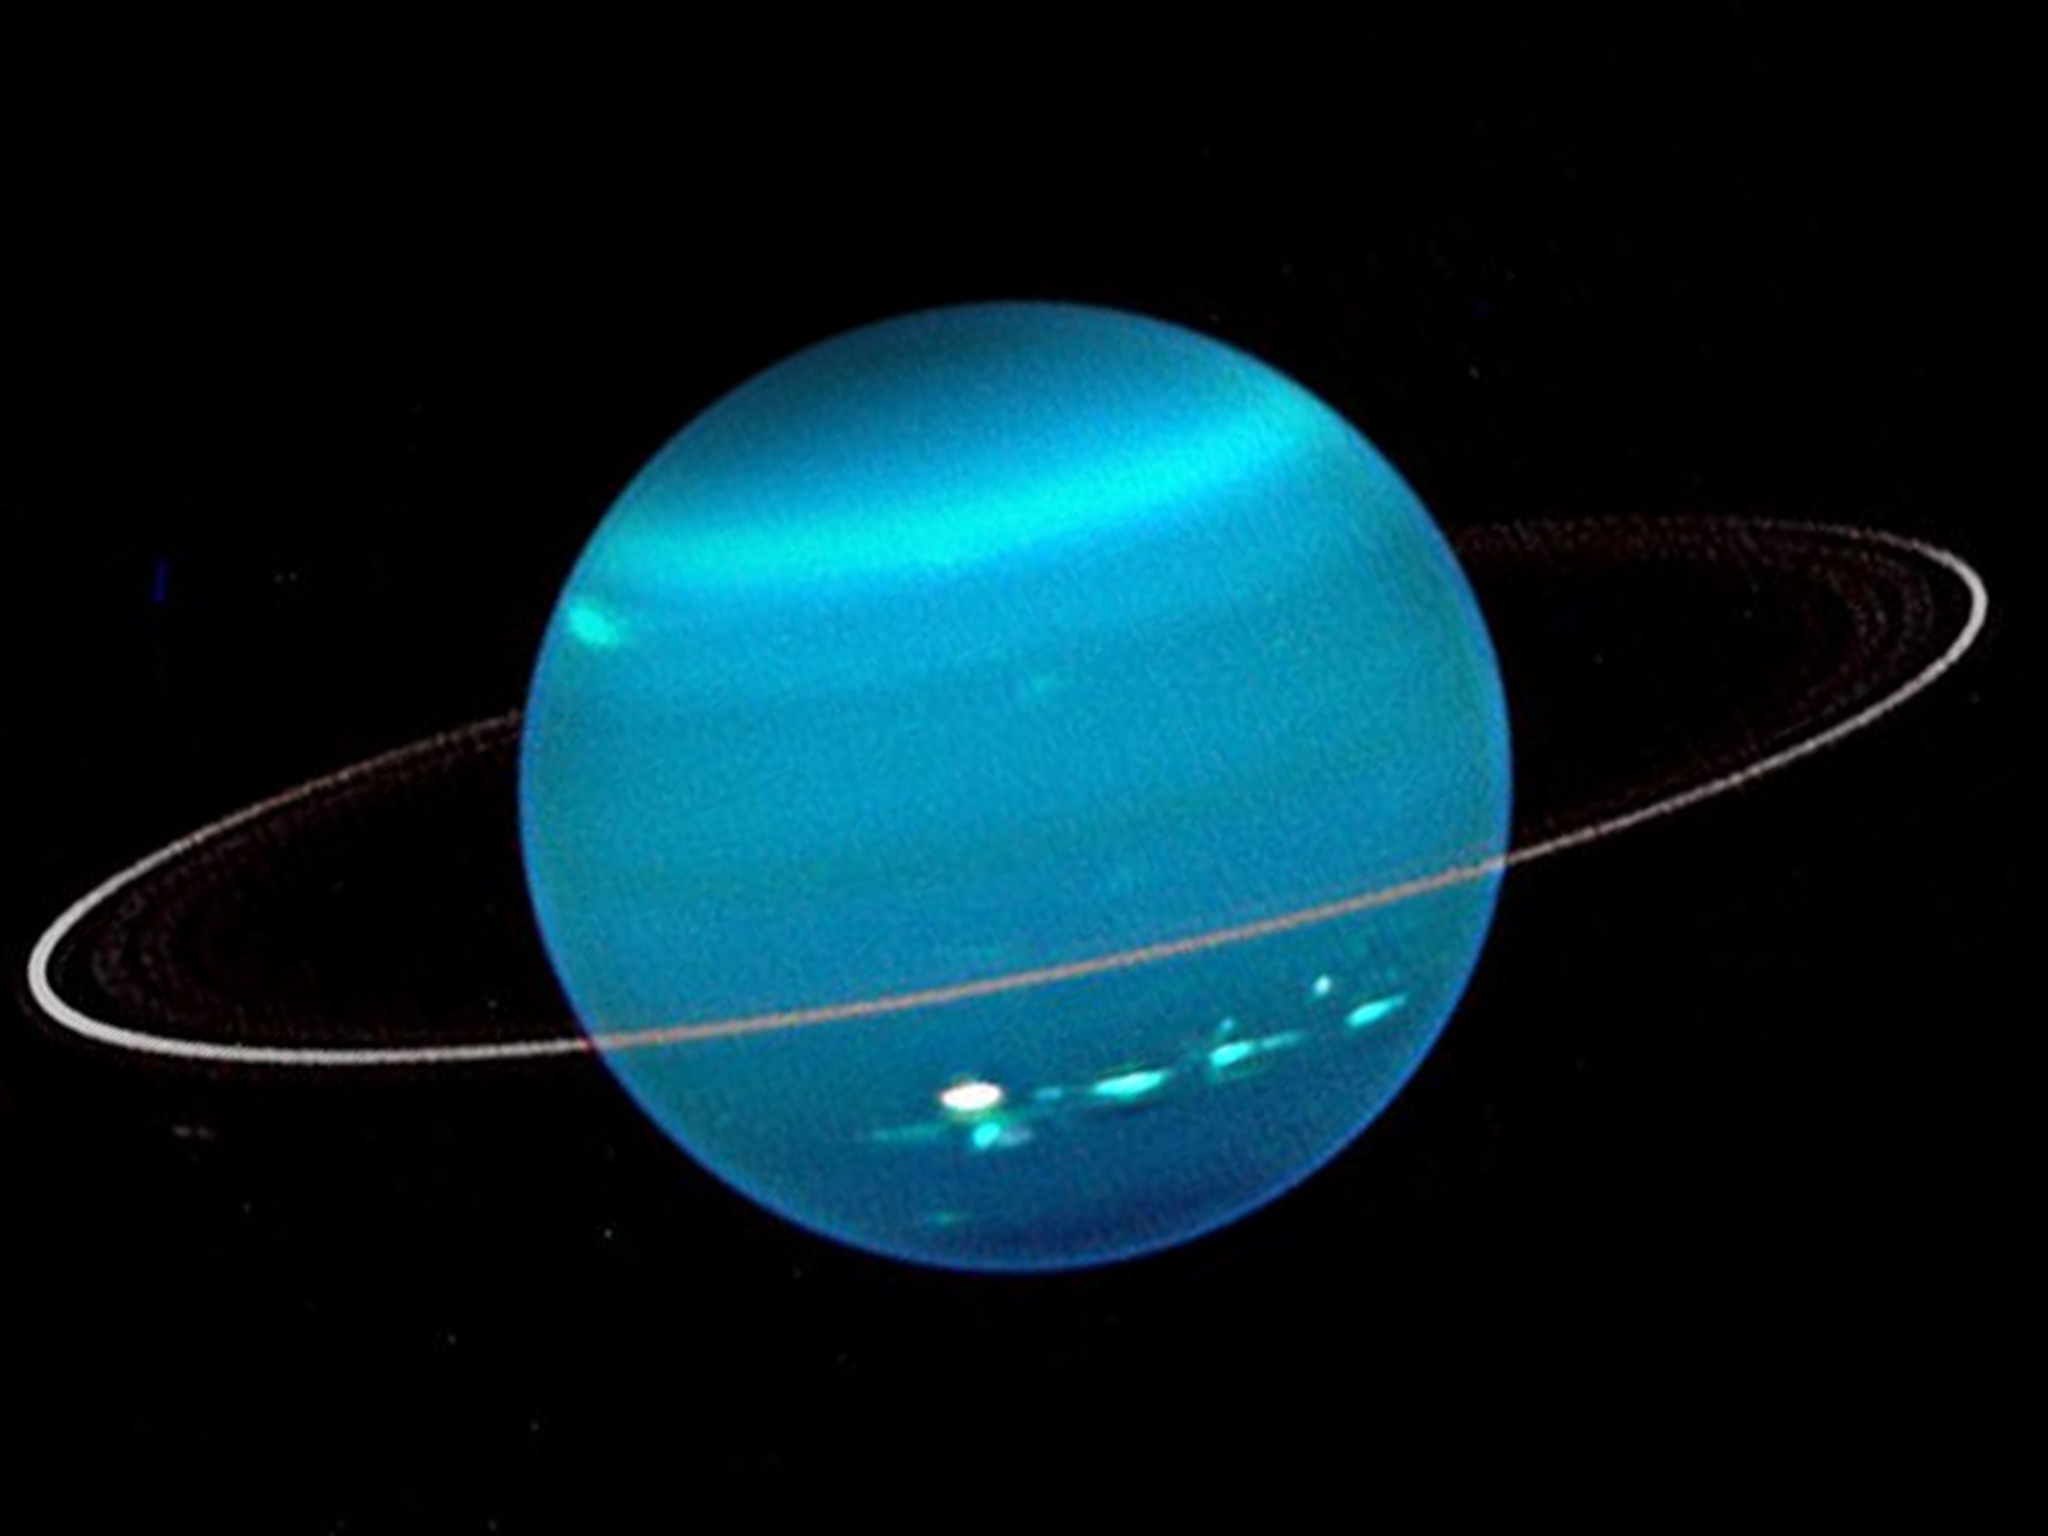 Uranus is the seventh planet from the sun